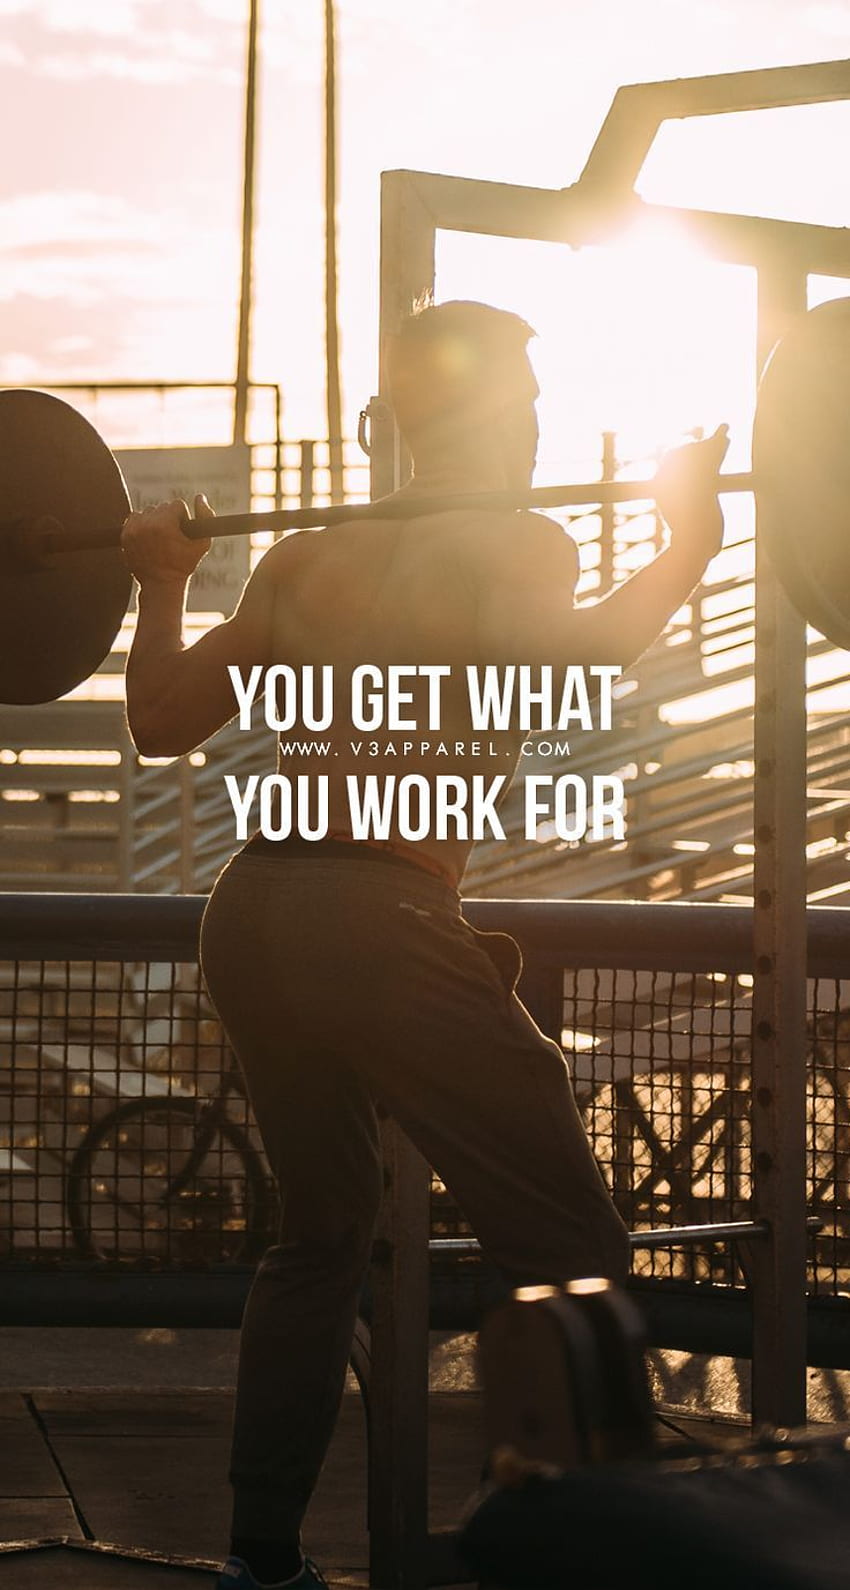 25 Fitness Quotes That'll Get Your Butt to the Gym